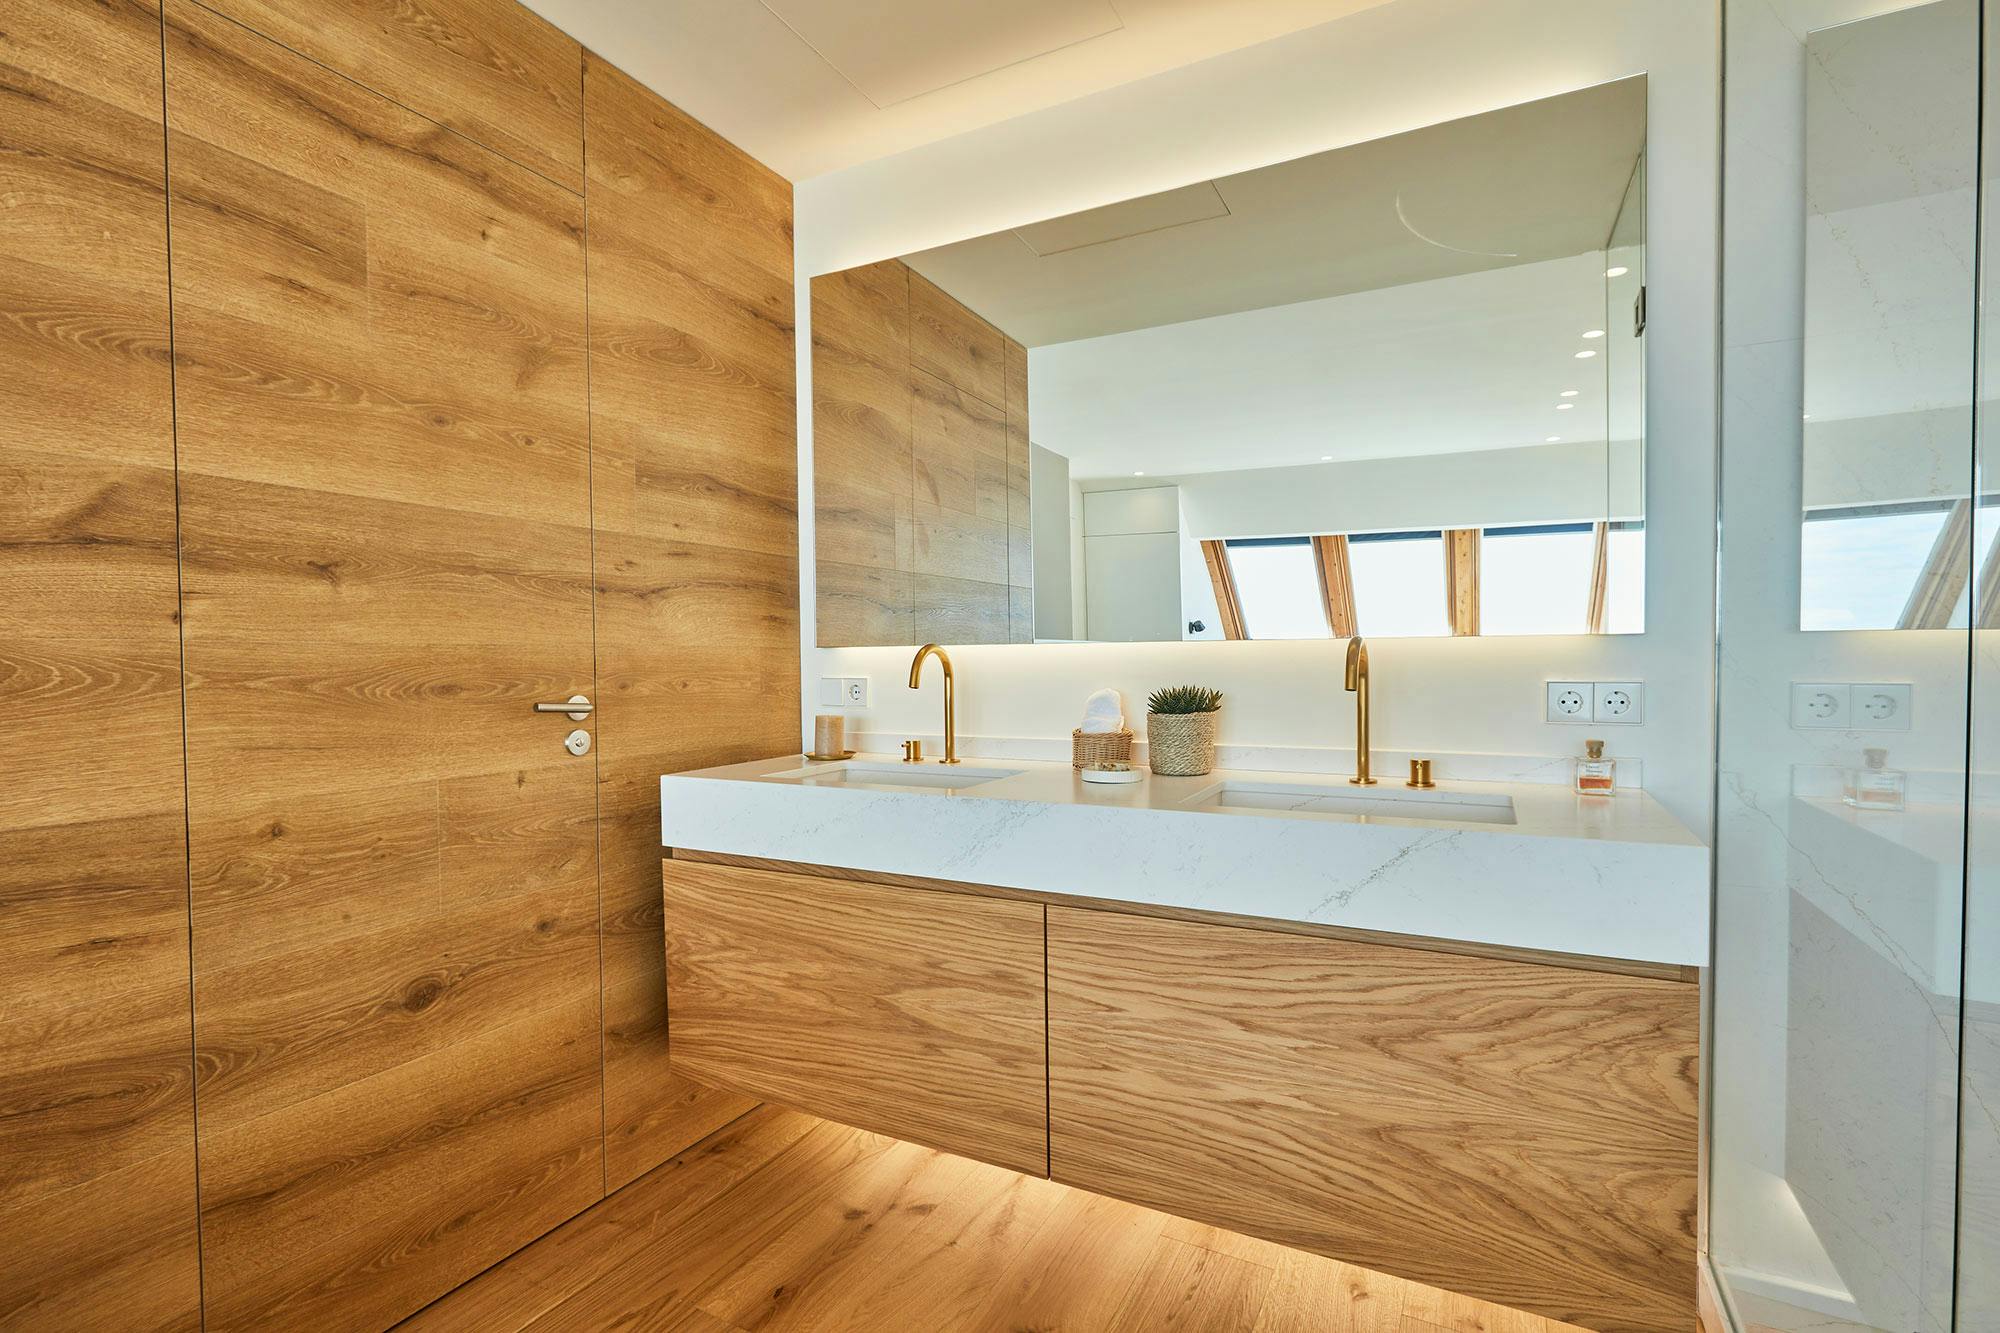 Numéro d'image 34 de la section actuelle de DKTN brings out the warmth of wood in this Extremadura home de Cosentino France